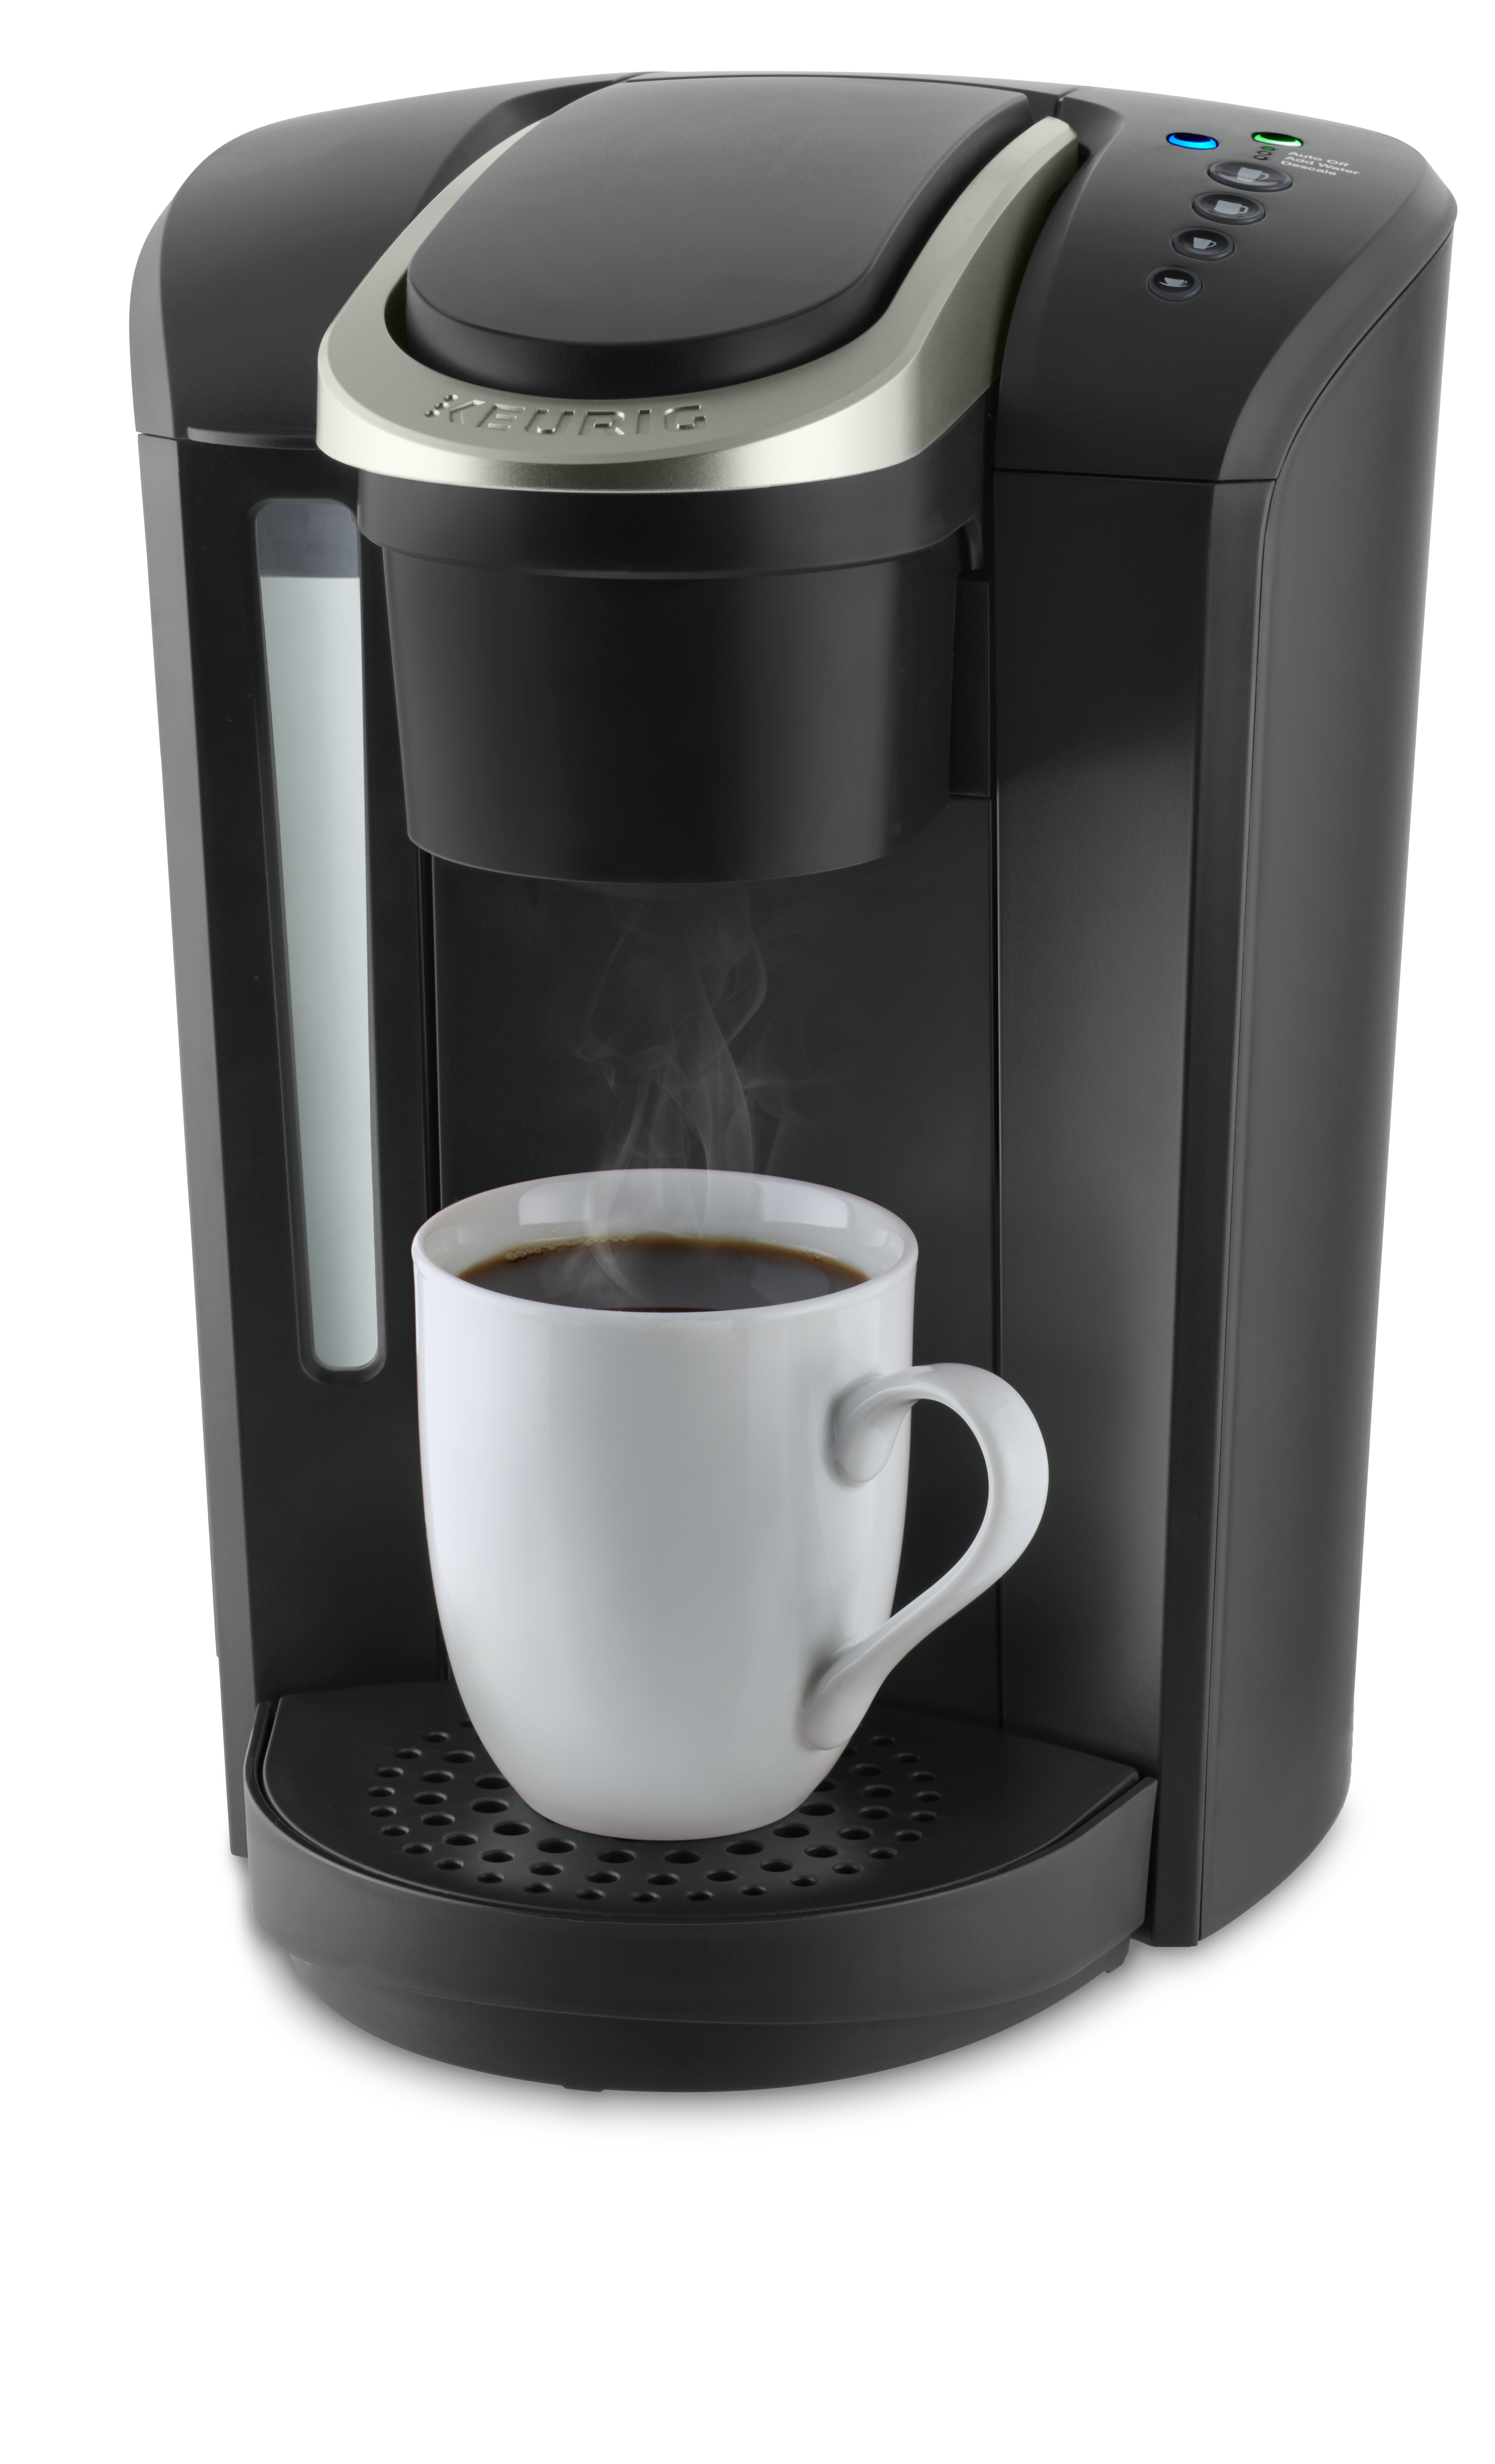 Keurig new SMART brewers offer a mind-blowing amount of coffee drinks